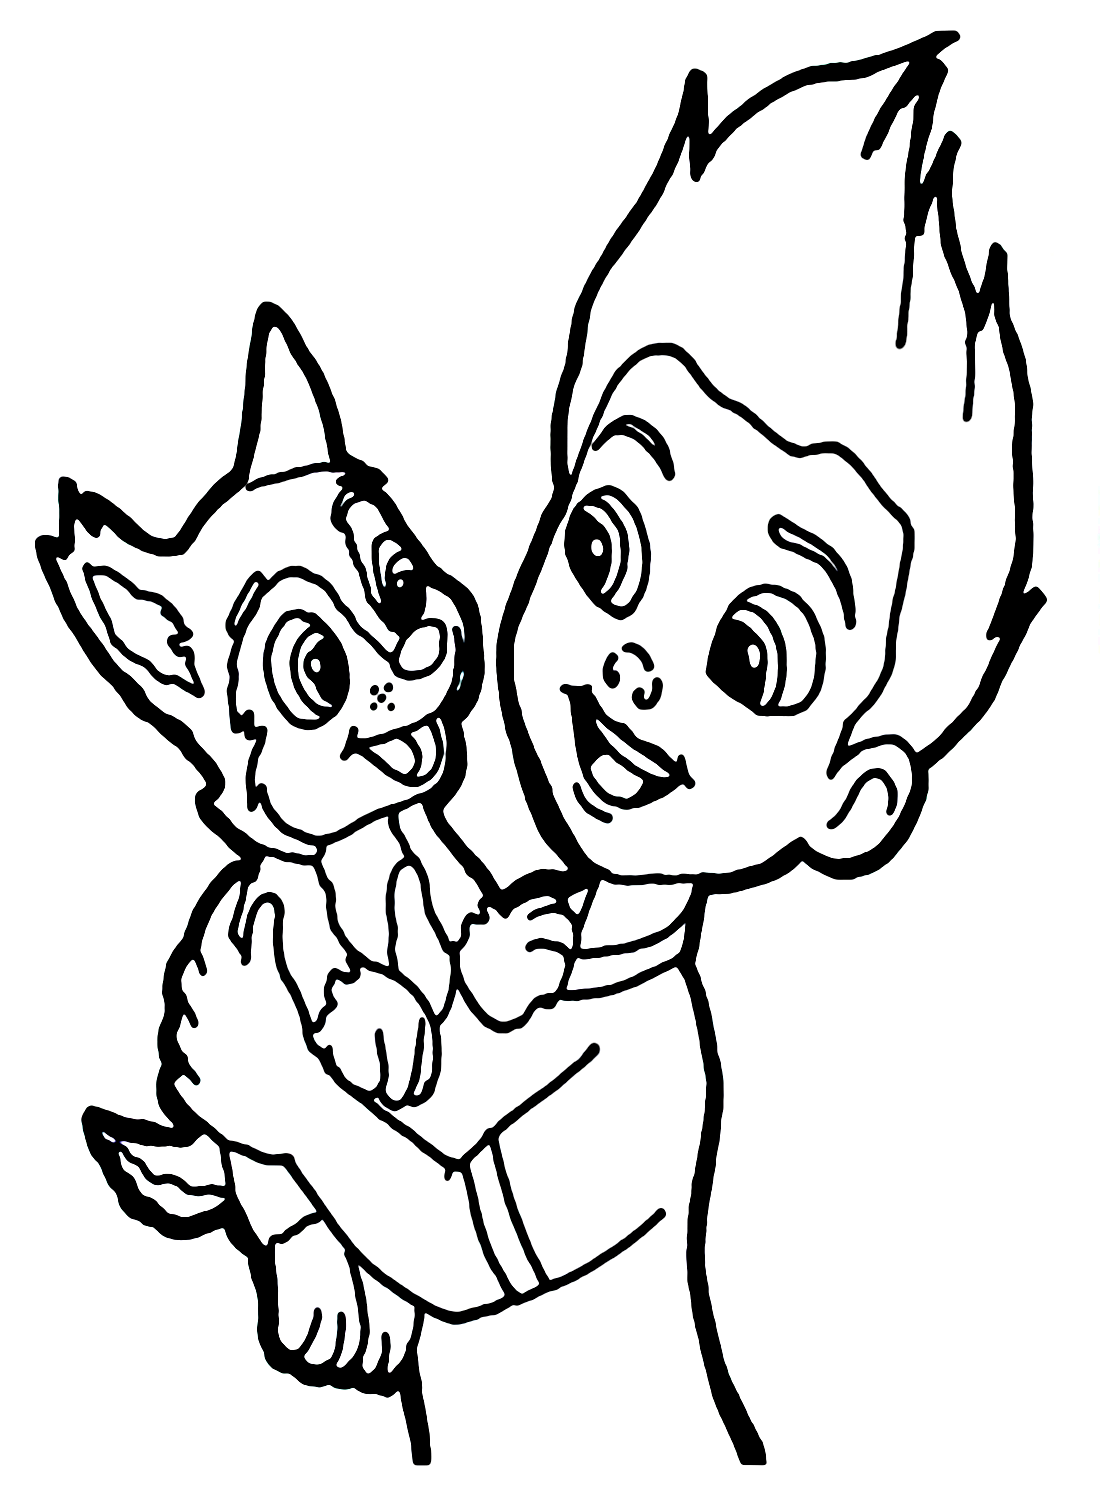 Ryder and Chase Paw Patrol Coloring Page